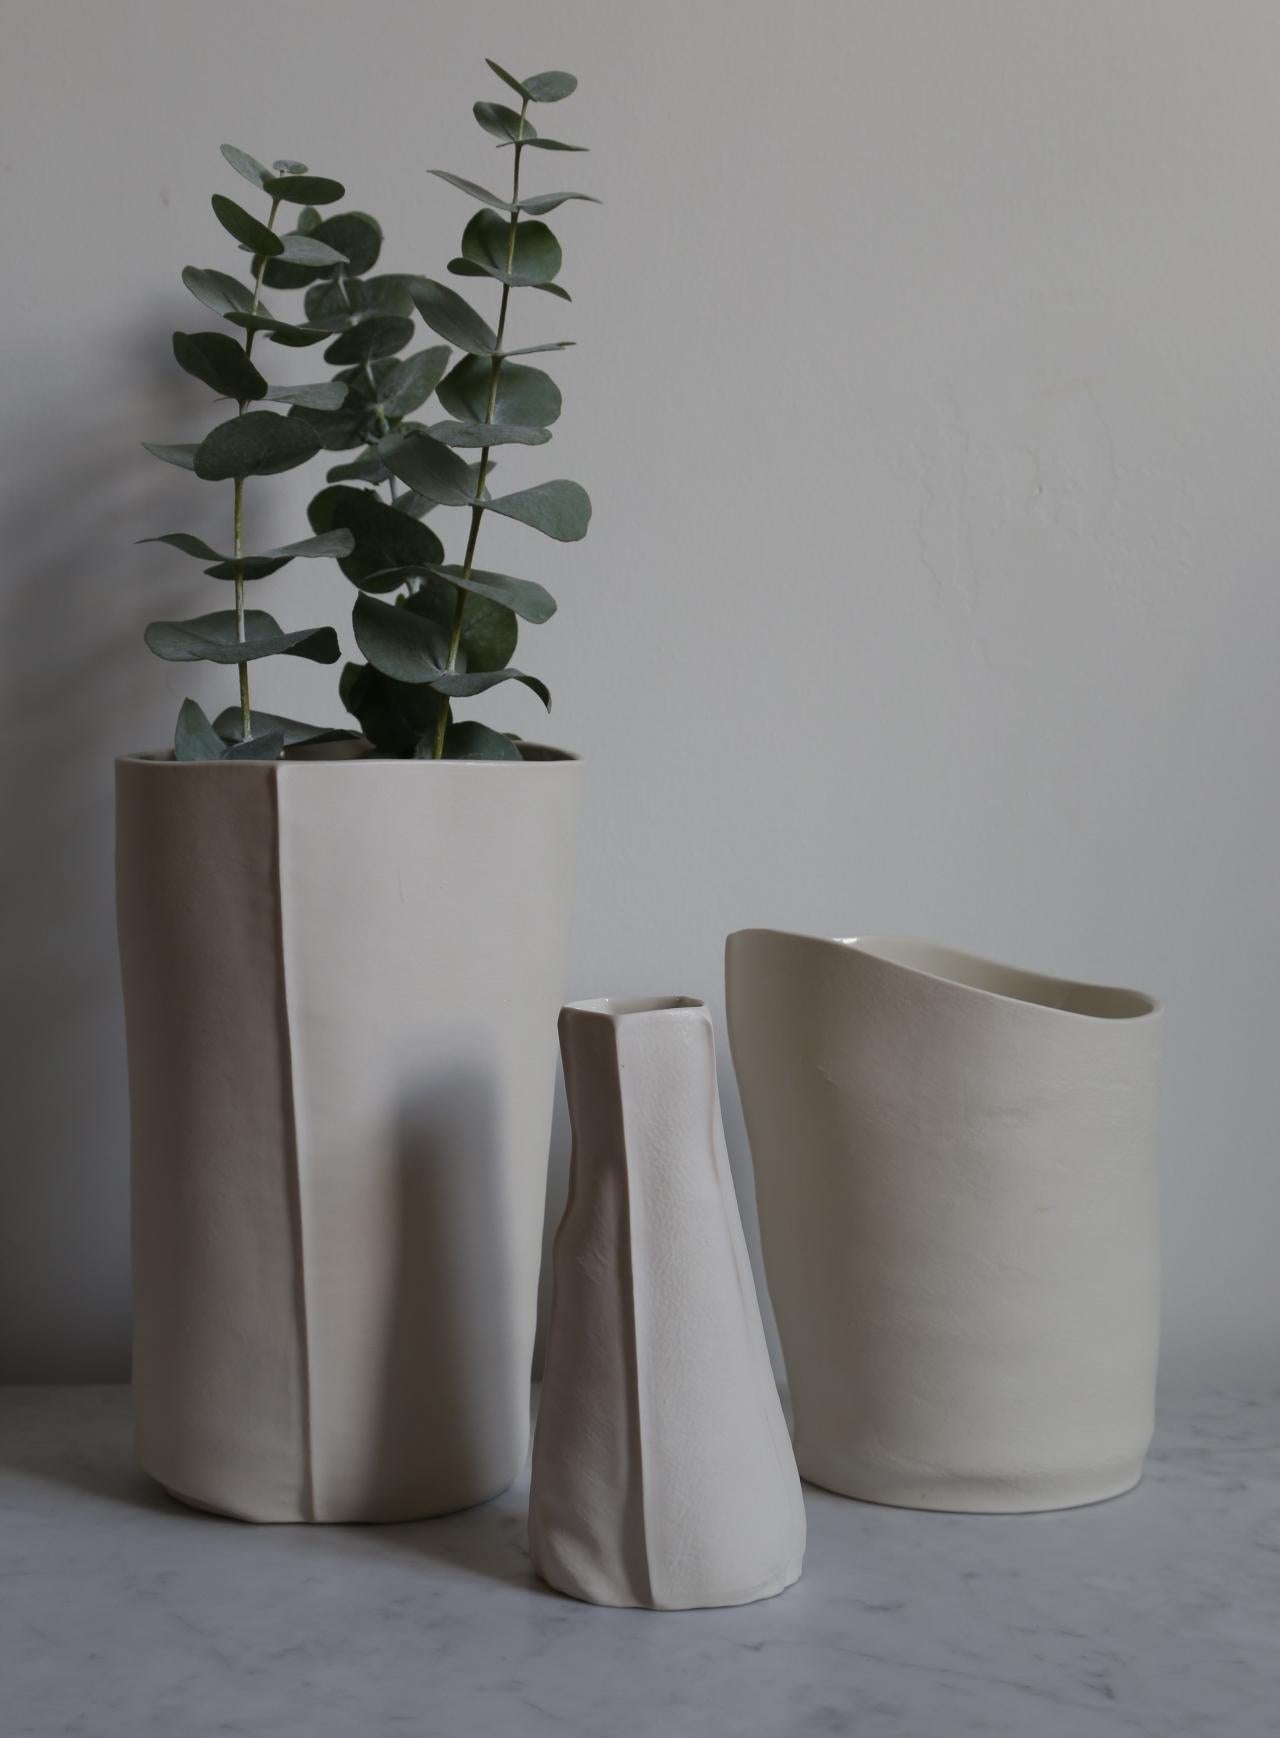 This listing is for a set of three unusual vases and vessels from the Kawa Porcelain series designed/made by Souda's Co-Owner, Luft Tanaka. These pieces are all unique. 

Each piece has been made by casting liquid porcelain into a molds made